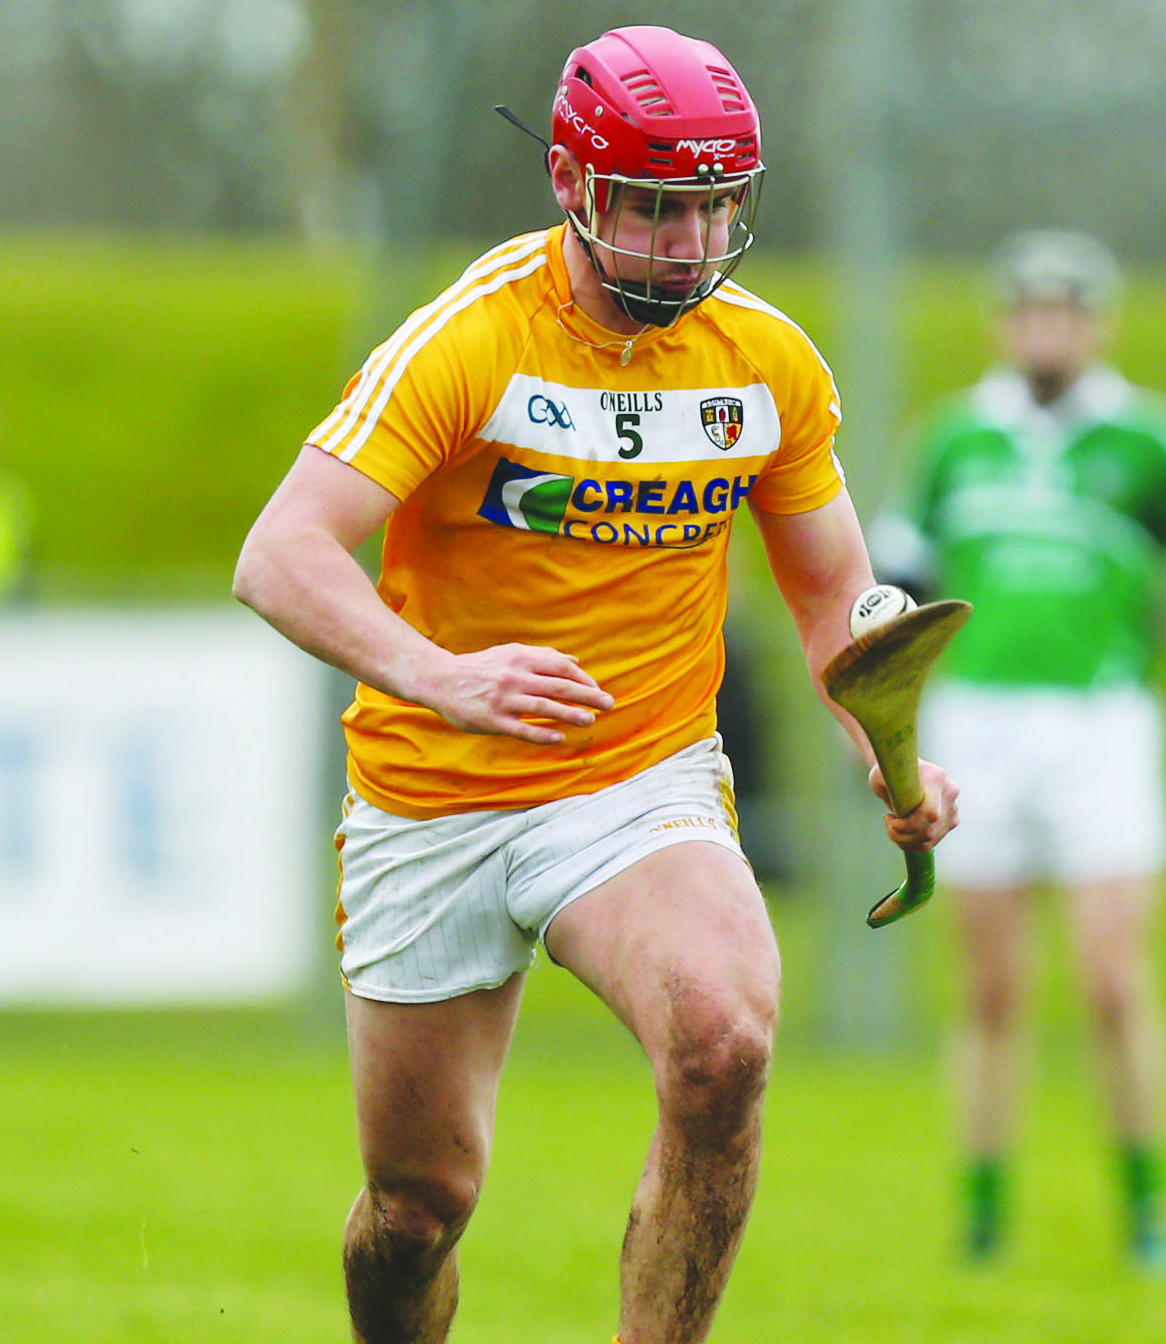 Antrim’s Simon McCrory is looking forward to facing Kilkenny in Sunday’s Walsh Cup game at Abbottstown in Dublin (2pm) after the Saffrons opened their 2017 campaign with a nine-point win over Westmeath in Kinnegad 